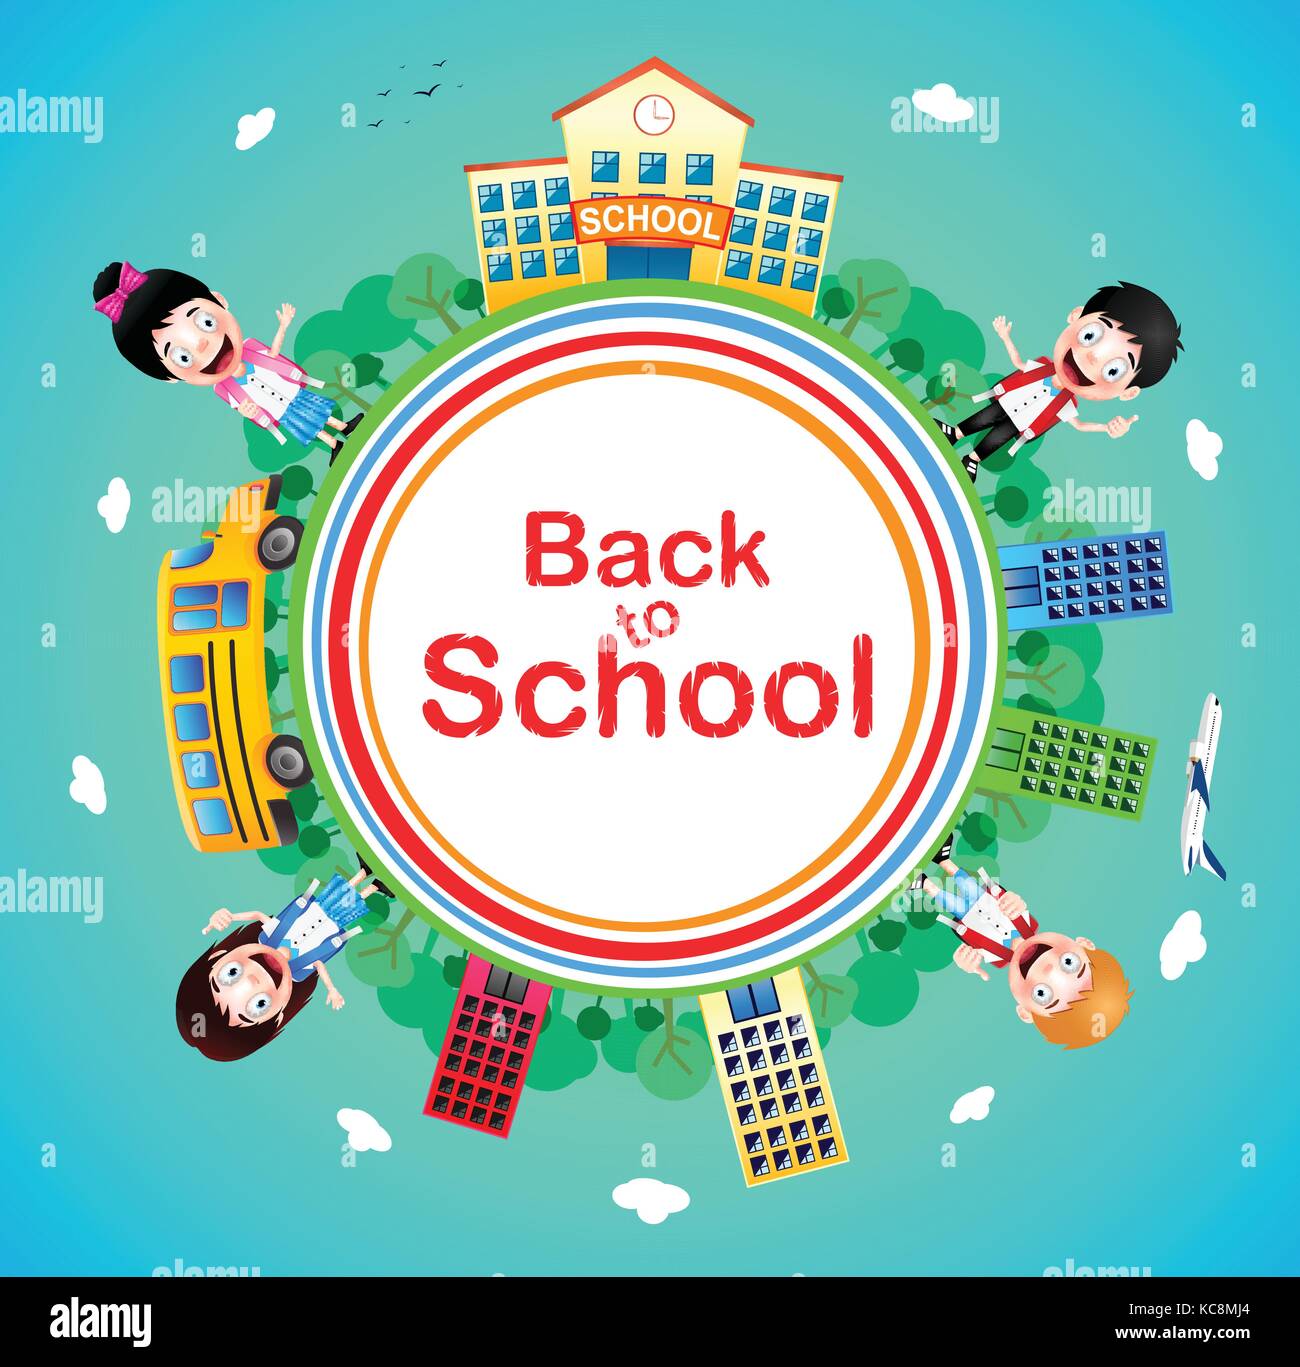 Back To School Text On A Circle With School Building And School Bus With Happy Kids Vector Characters On Blue Background Vector Illustration Stock Vector Image Art Alamy